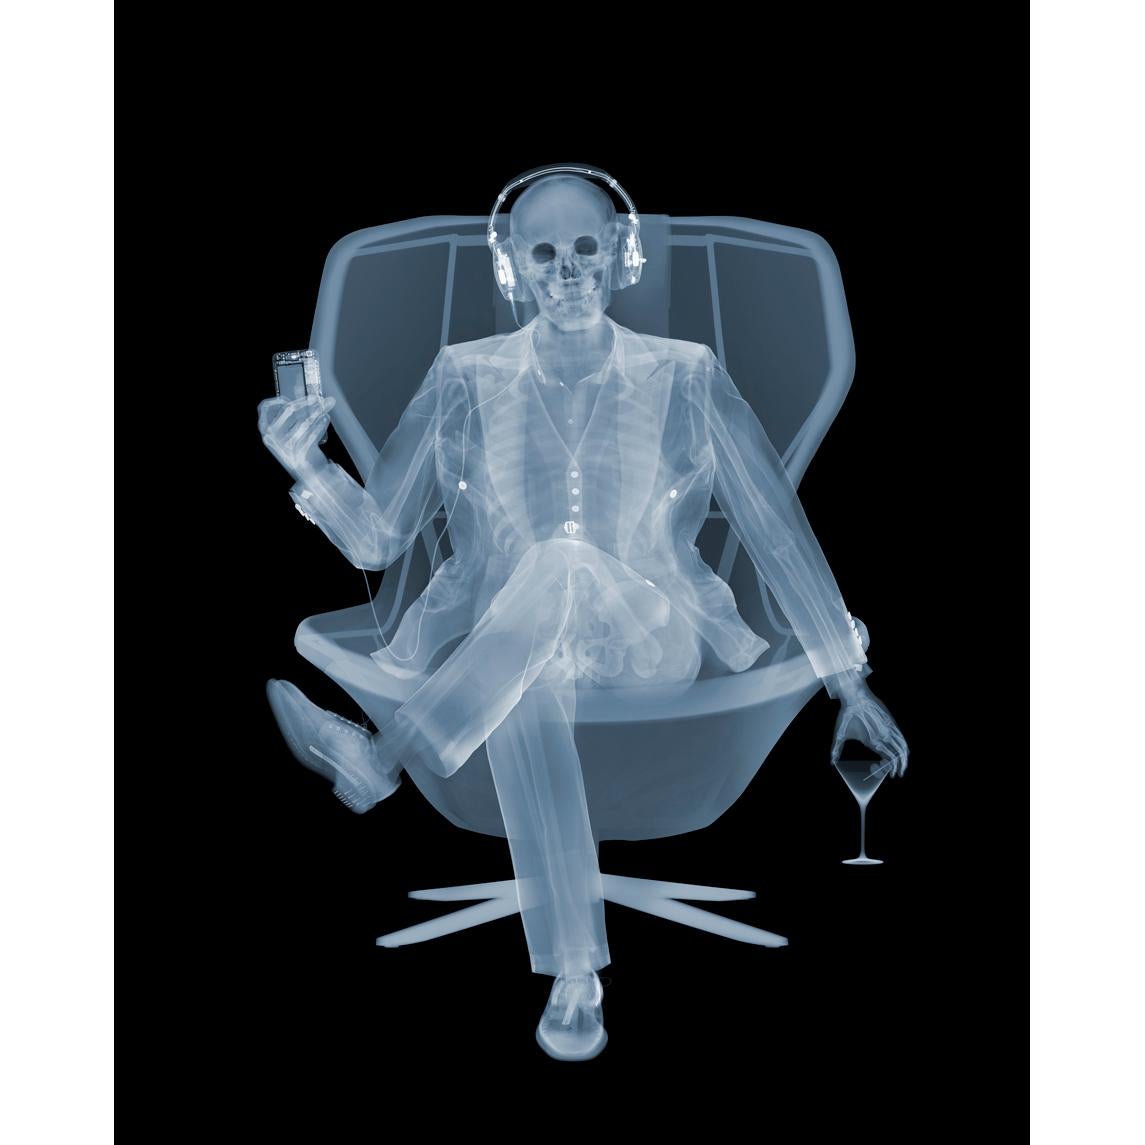 Nick Veasey Black and White Photograph - Easy Listener, February 2018